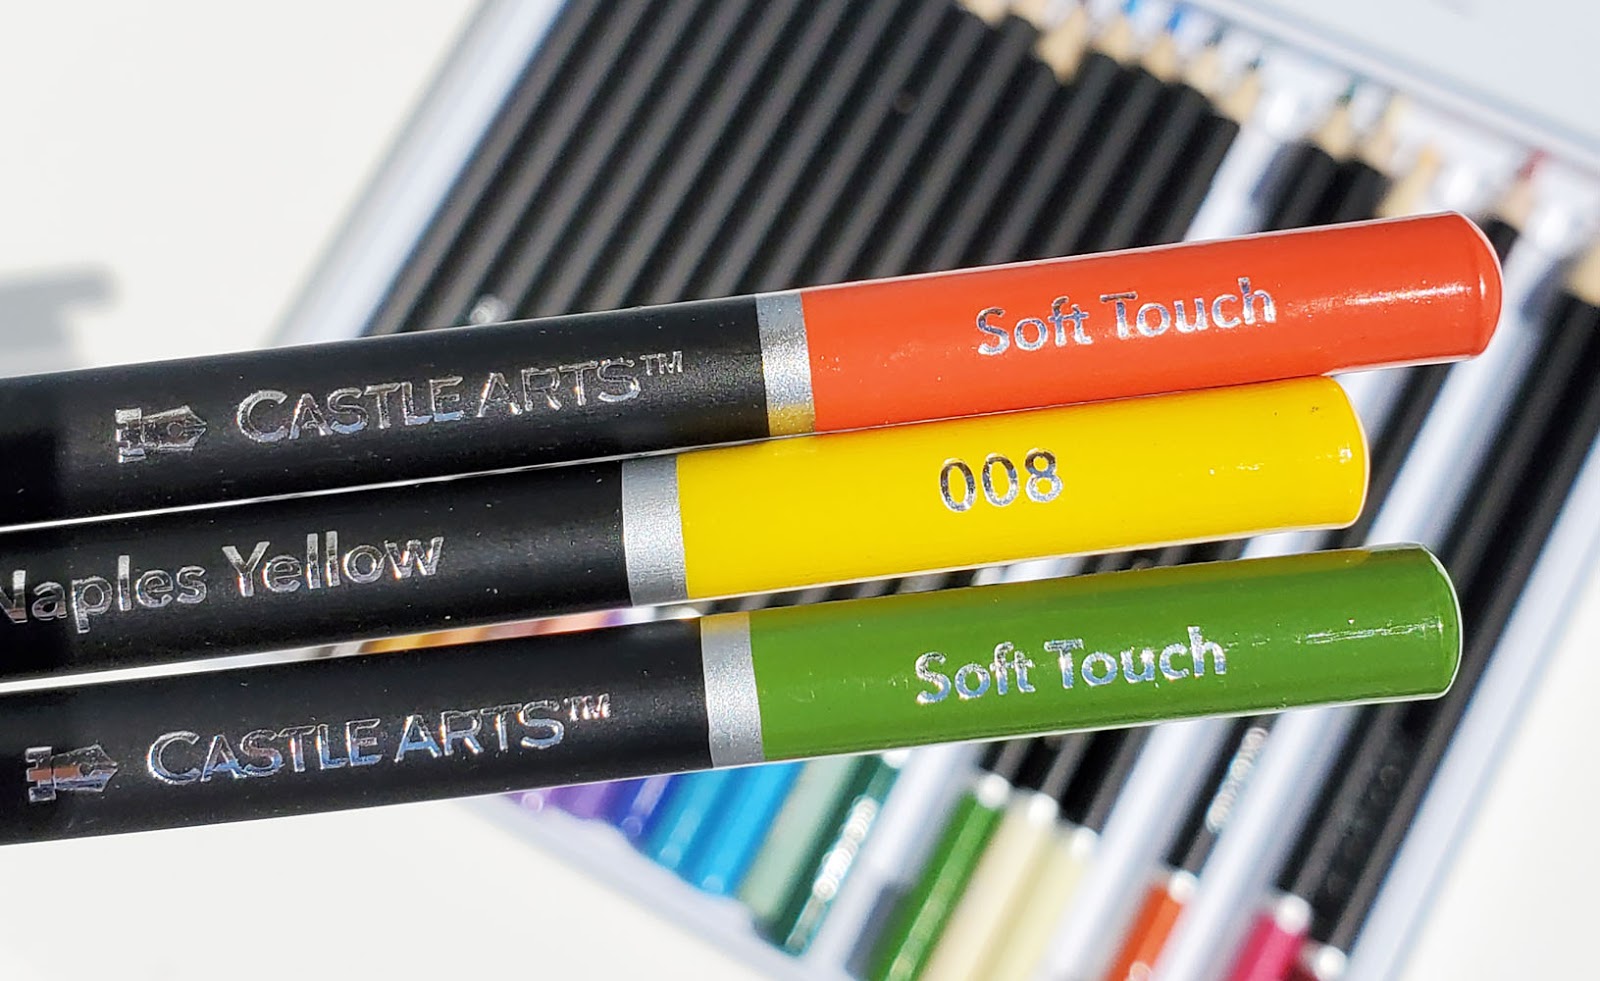 Swatch & Chat, New 120 Castle Arts Colored Pencils